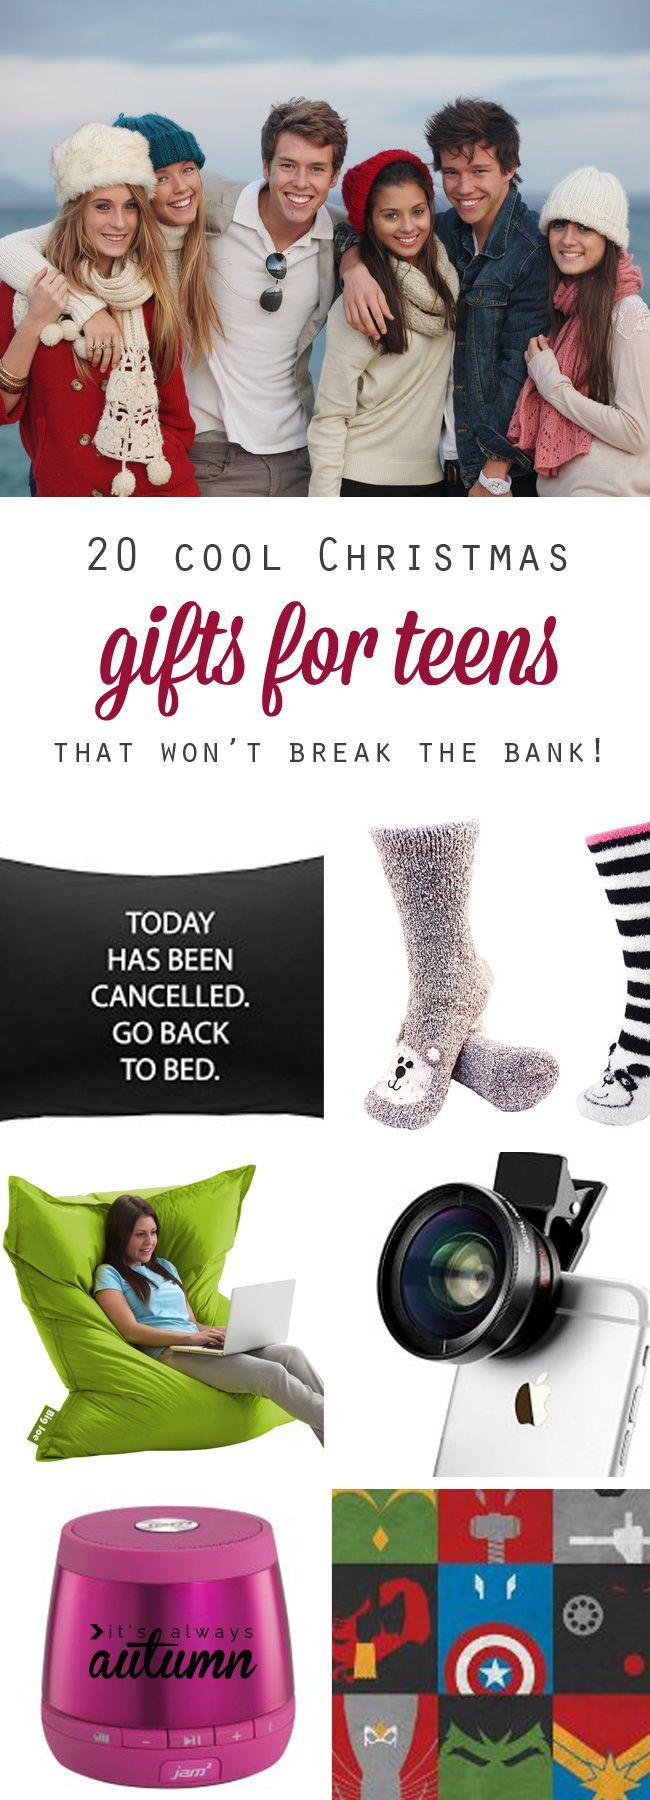 Christmas Gift Ideas For Teenagers
 17 Best images about Gift Ideas for boys on Pinterest